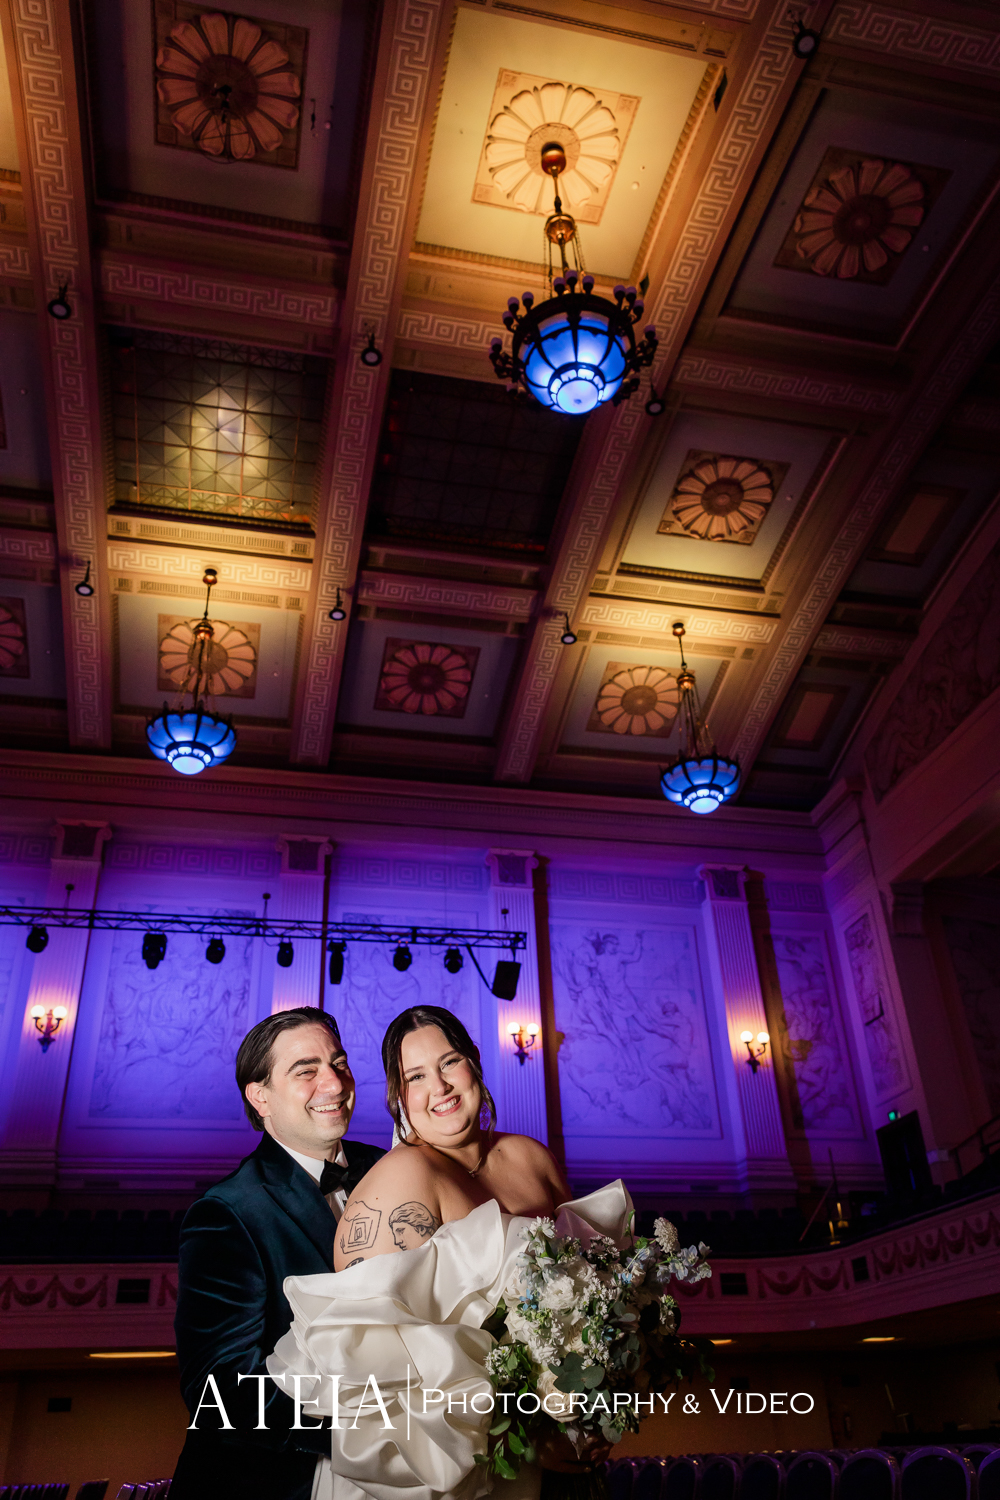 , Lucy and Virgil&#8217;s wedding photography at Melbourne Town Hall captured by ATEIA Photography &#038; Video